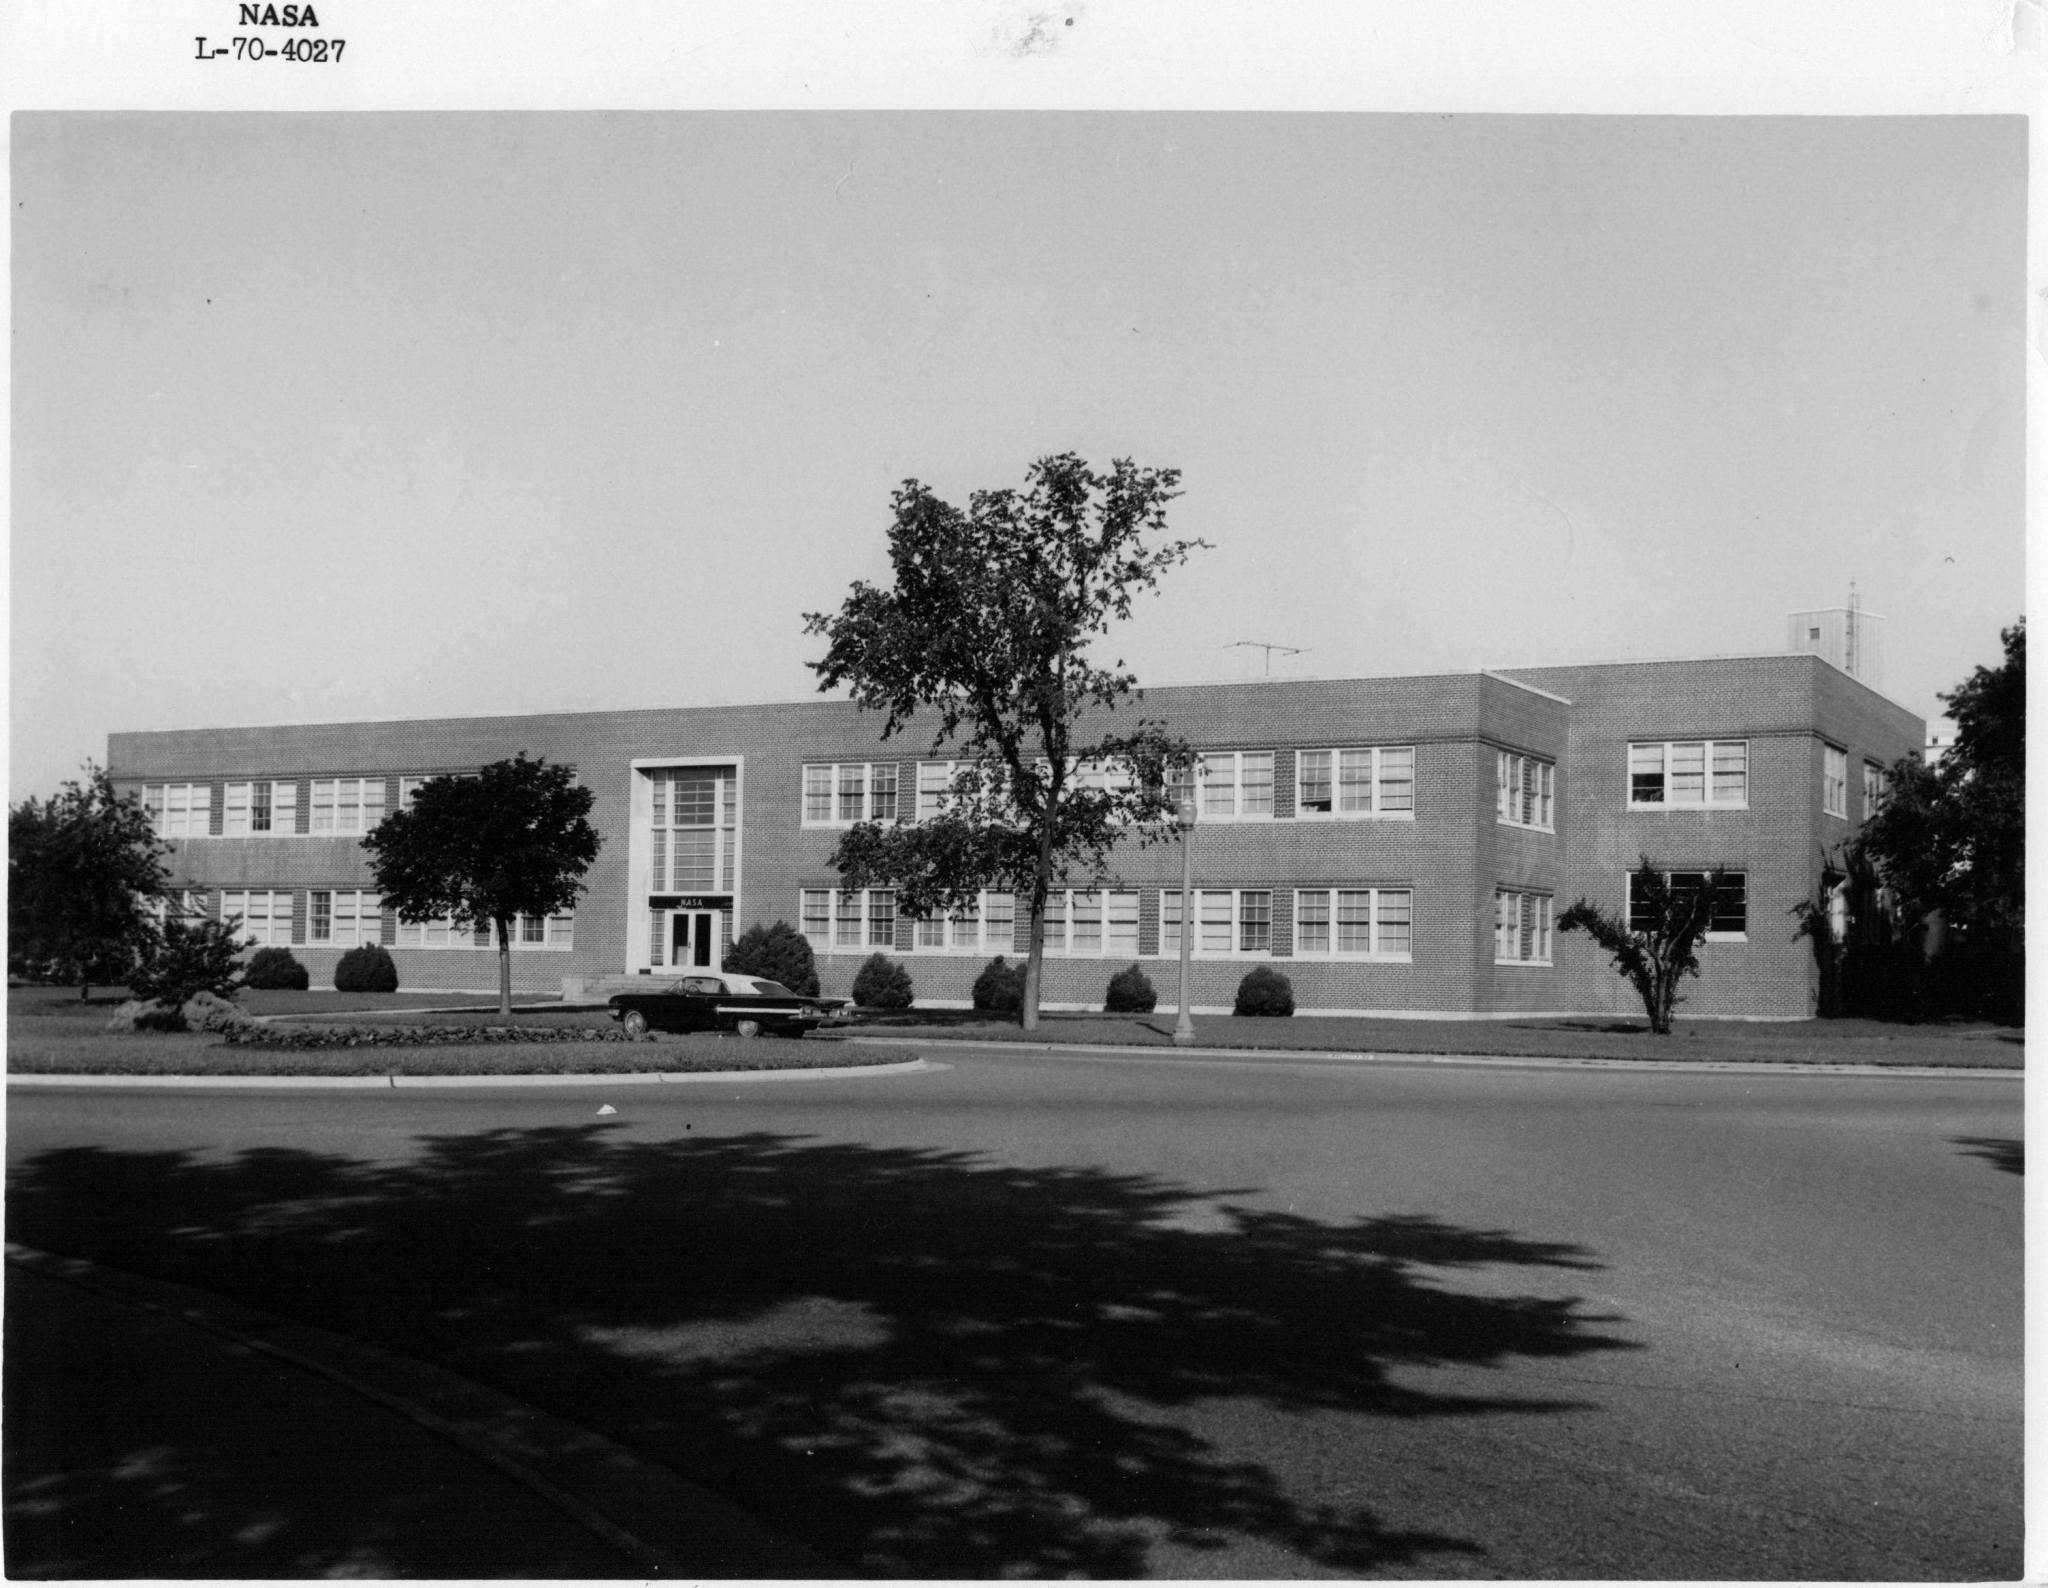 This is a photo of the exterior of Building 1229 taken in 1970. Trees and bushes line the street and a retro car is parked in front of the building.